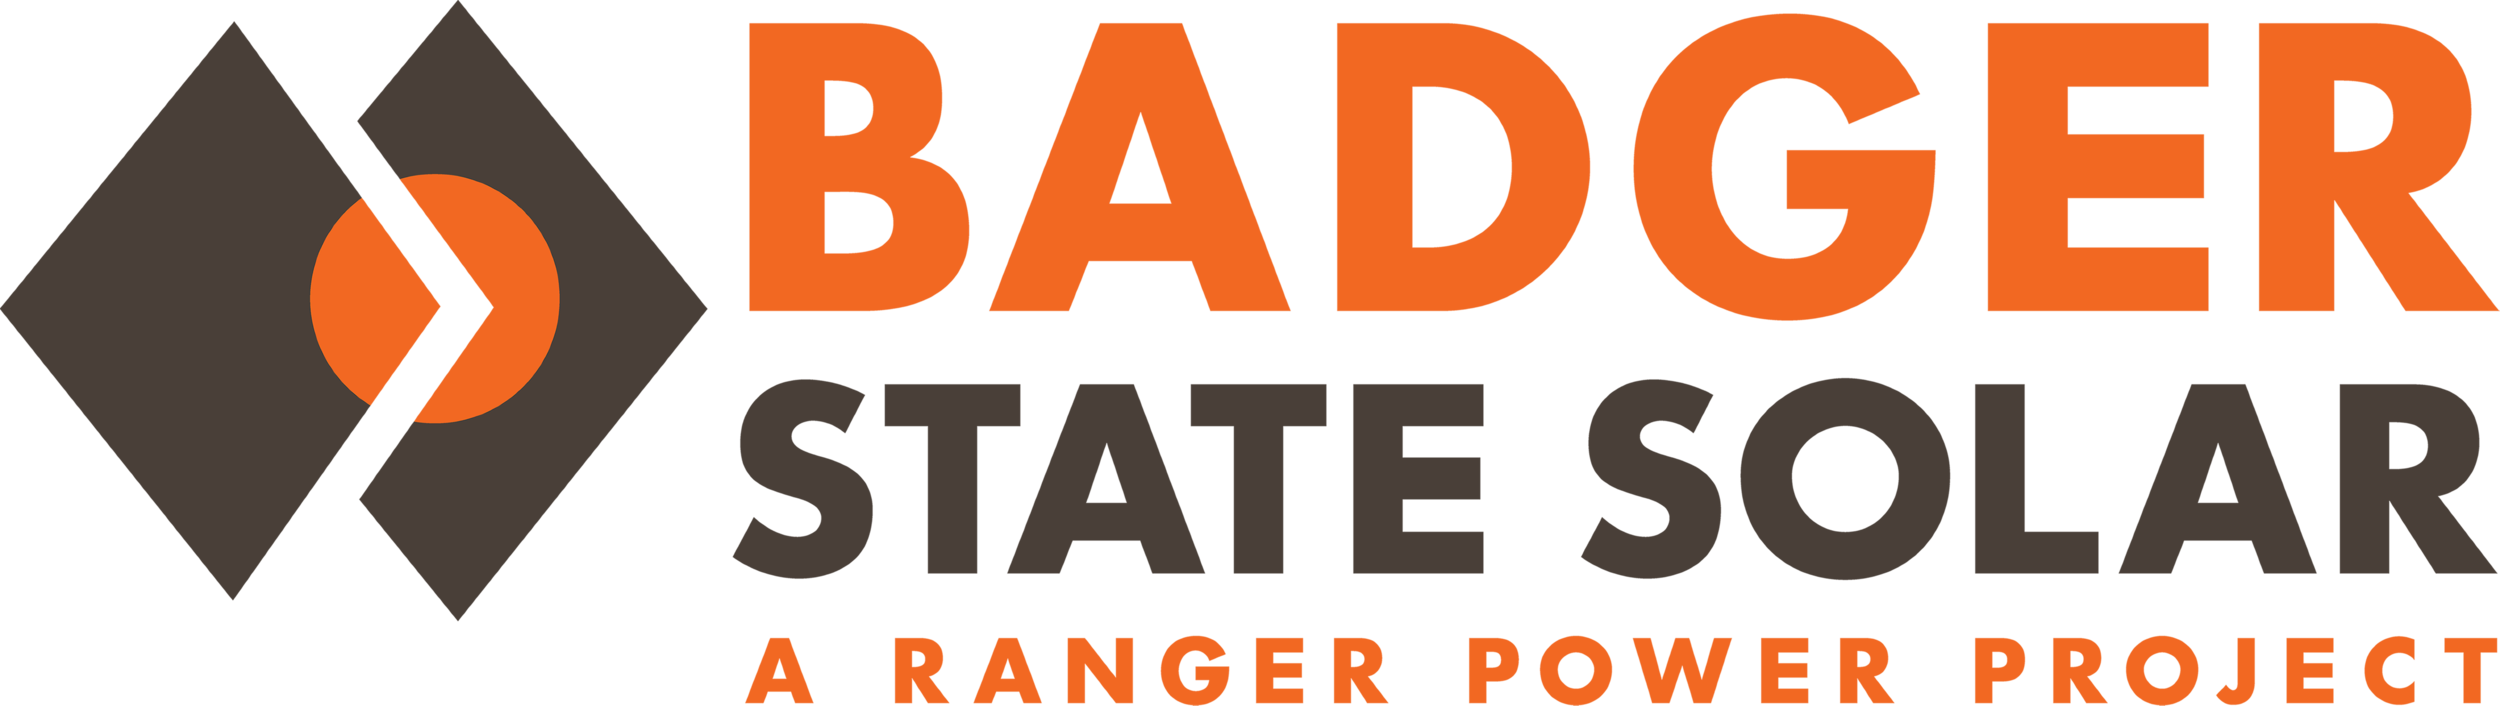 Badger State Solar | A Ranger Power Project